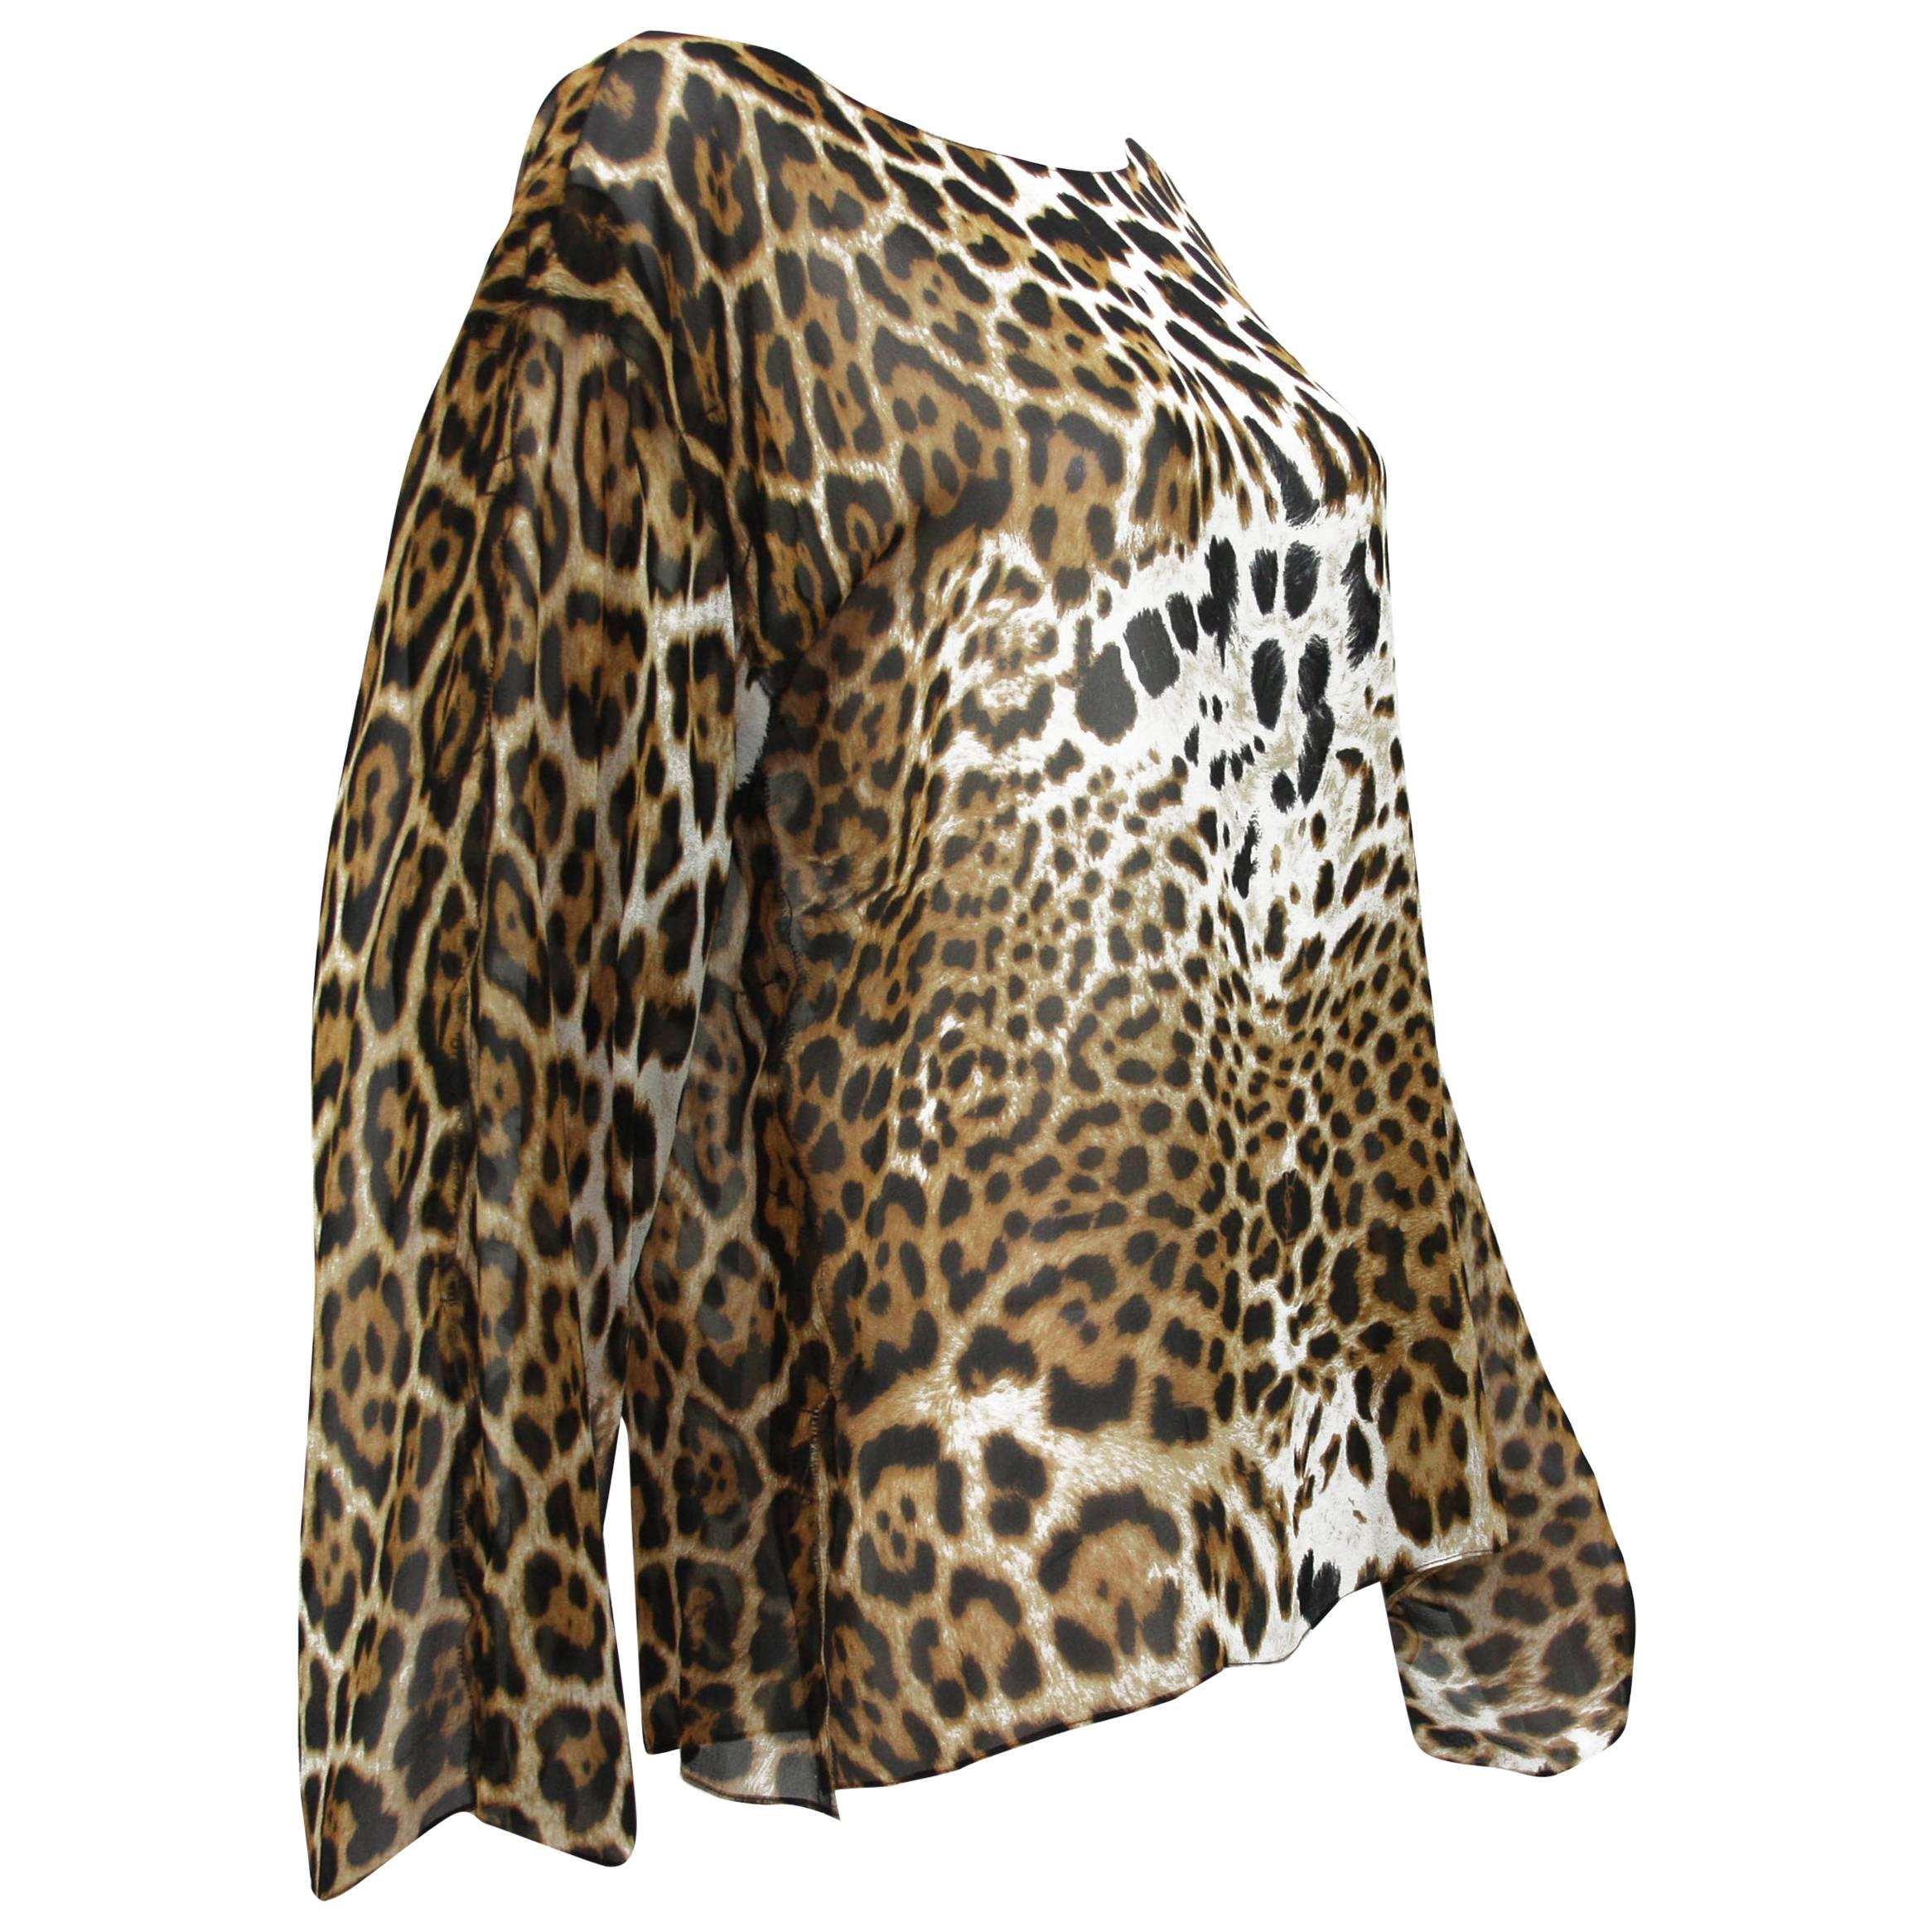 Tom Ford for Yves Saint Laurent S/S 2002 Safari Collection Silk Blouse Fr. 38- 6 For Sale